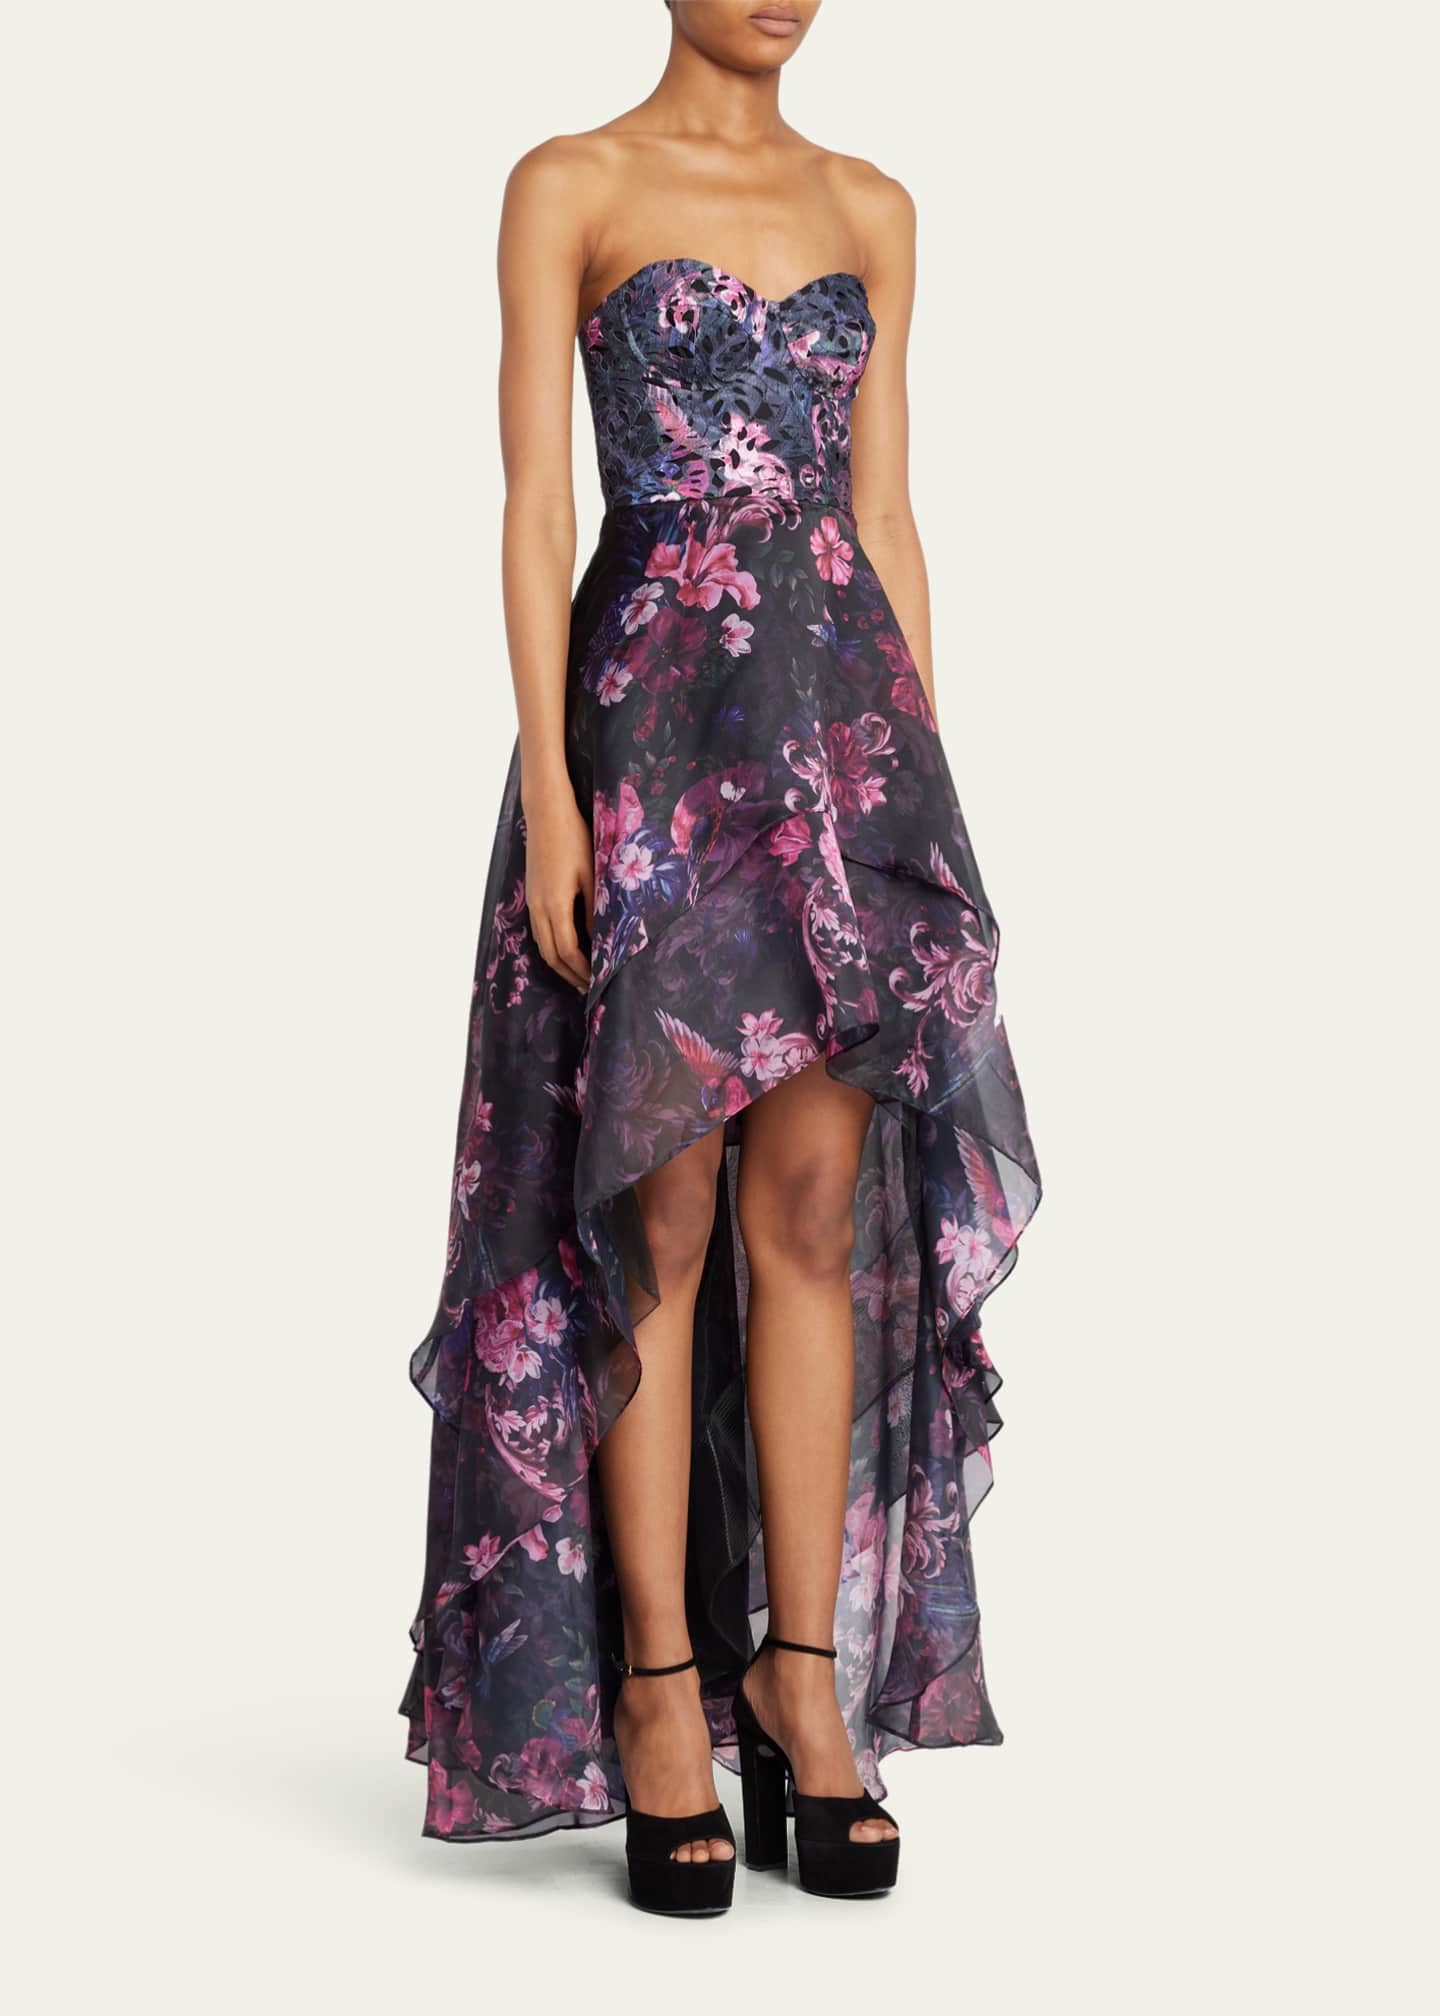 Marchesa Notte Strapless Floral-Print High-Low Gown - Bergdorf Goodman